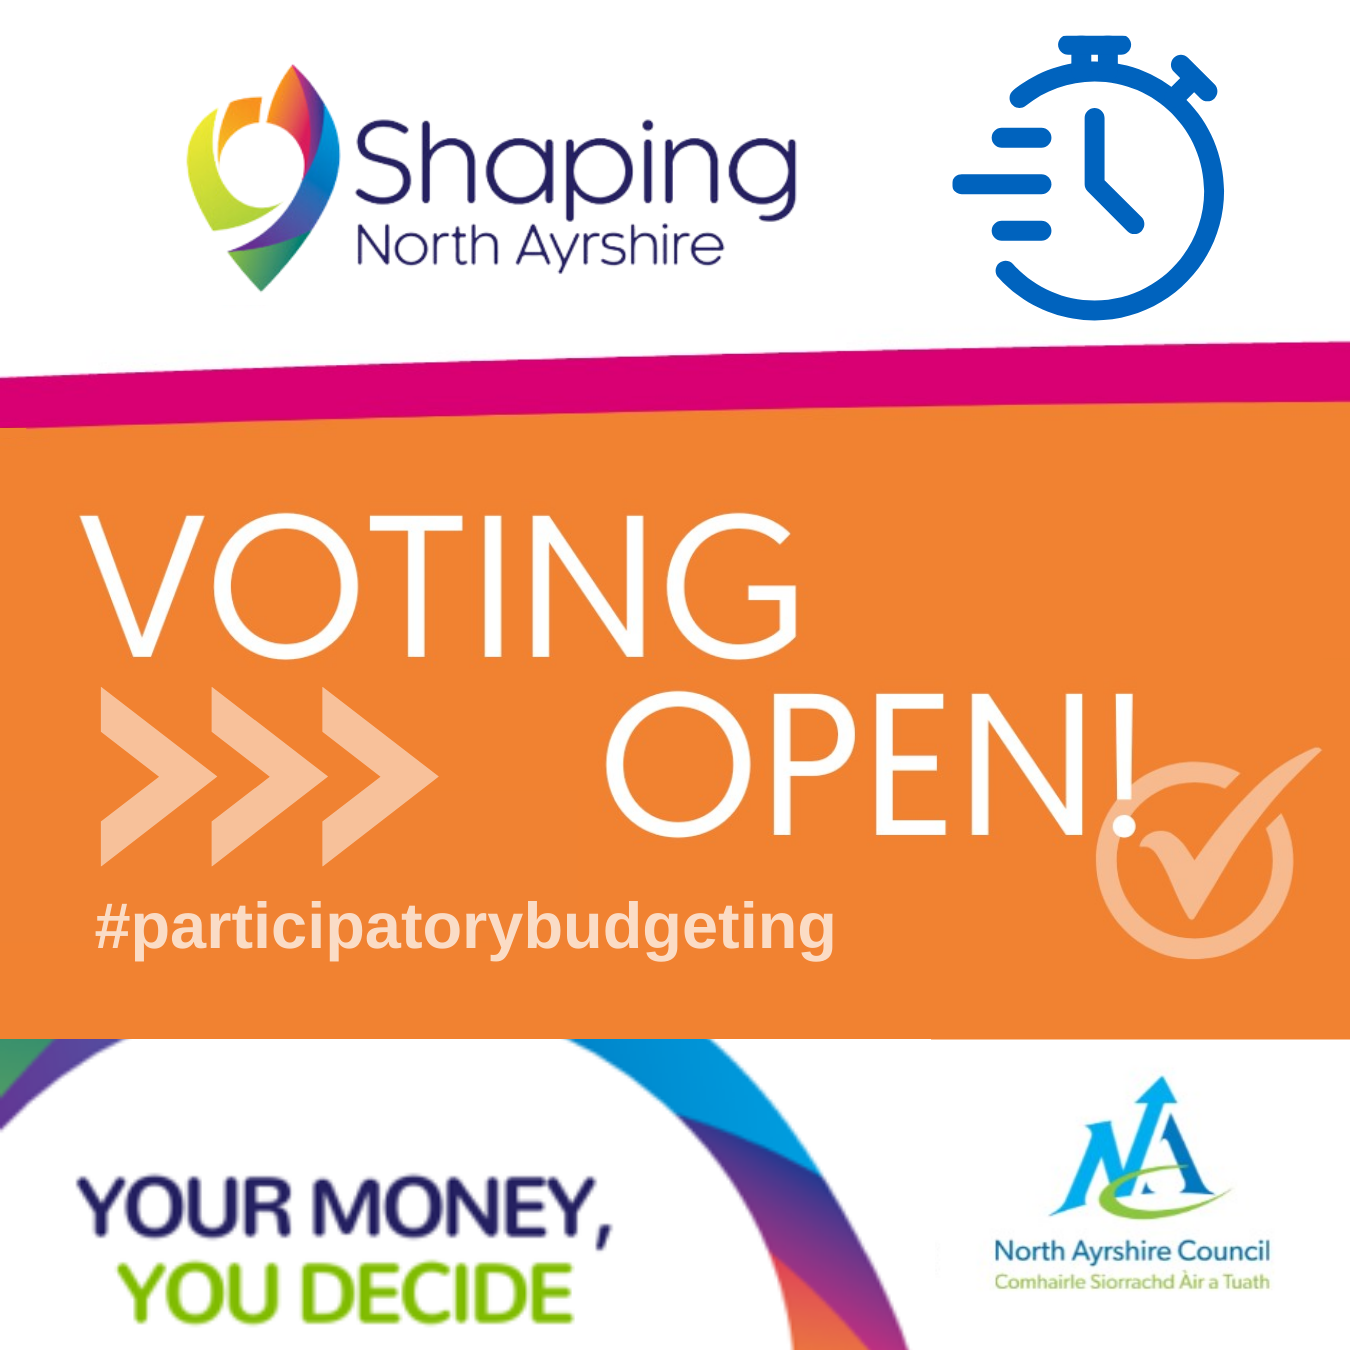 Participatory Budgeting Voting Open decorative graphic